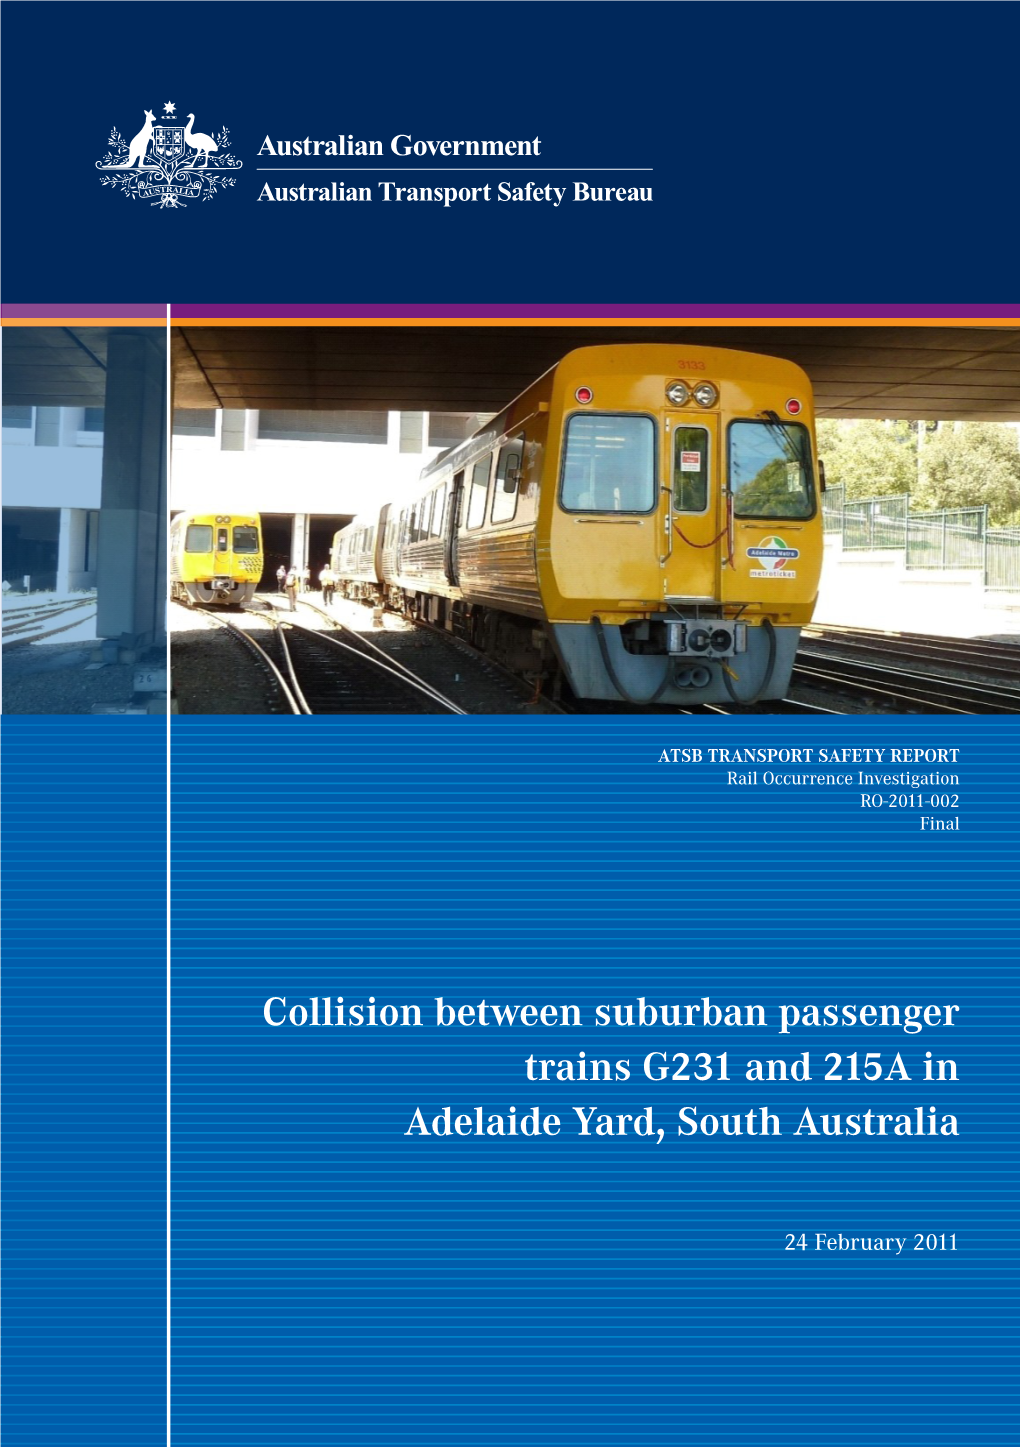 Collision Between Suburban Passenger Trains G231 and 215A in Adelaide Yard, South Australia